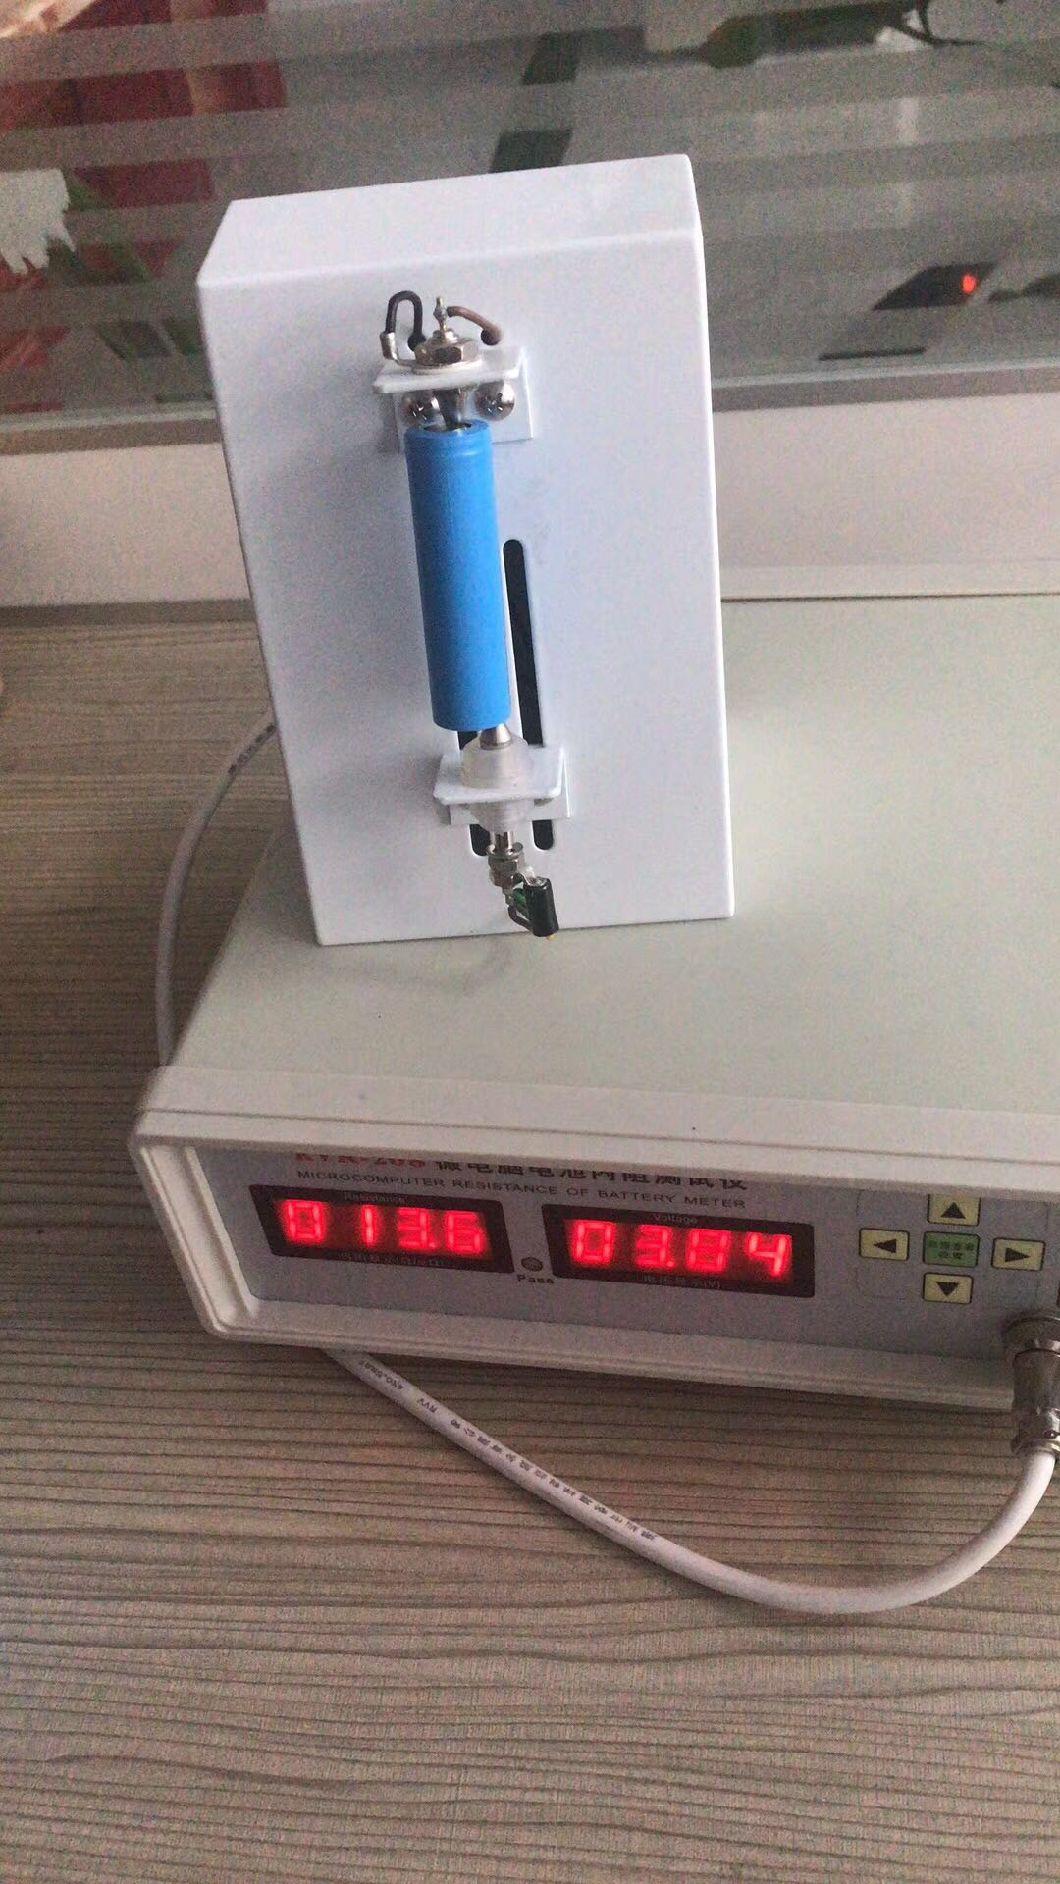 Step One Battery Pack Assembling Machine Internal Resistance and Voltage Tester (TWSL-IR02)